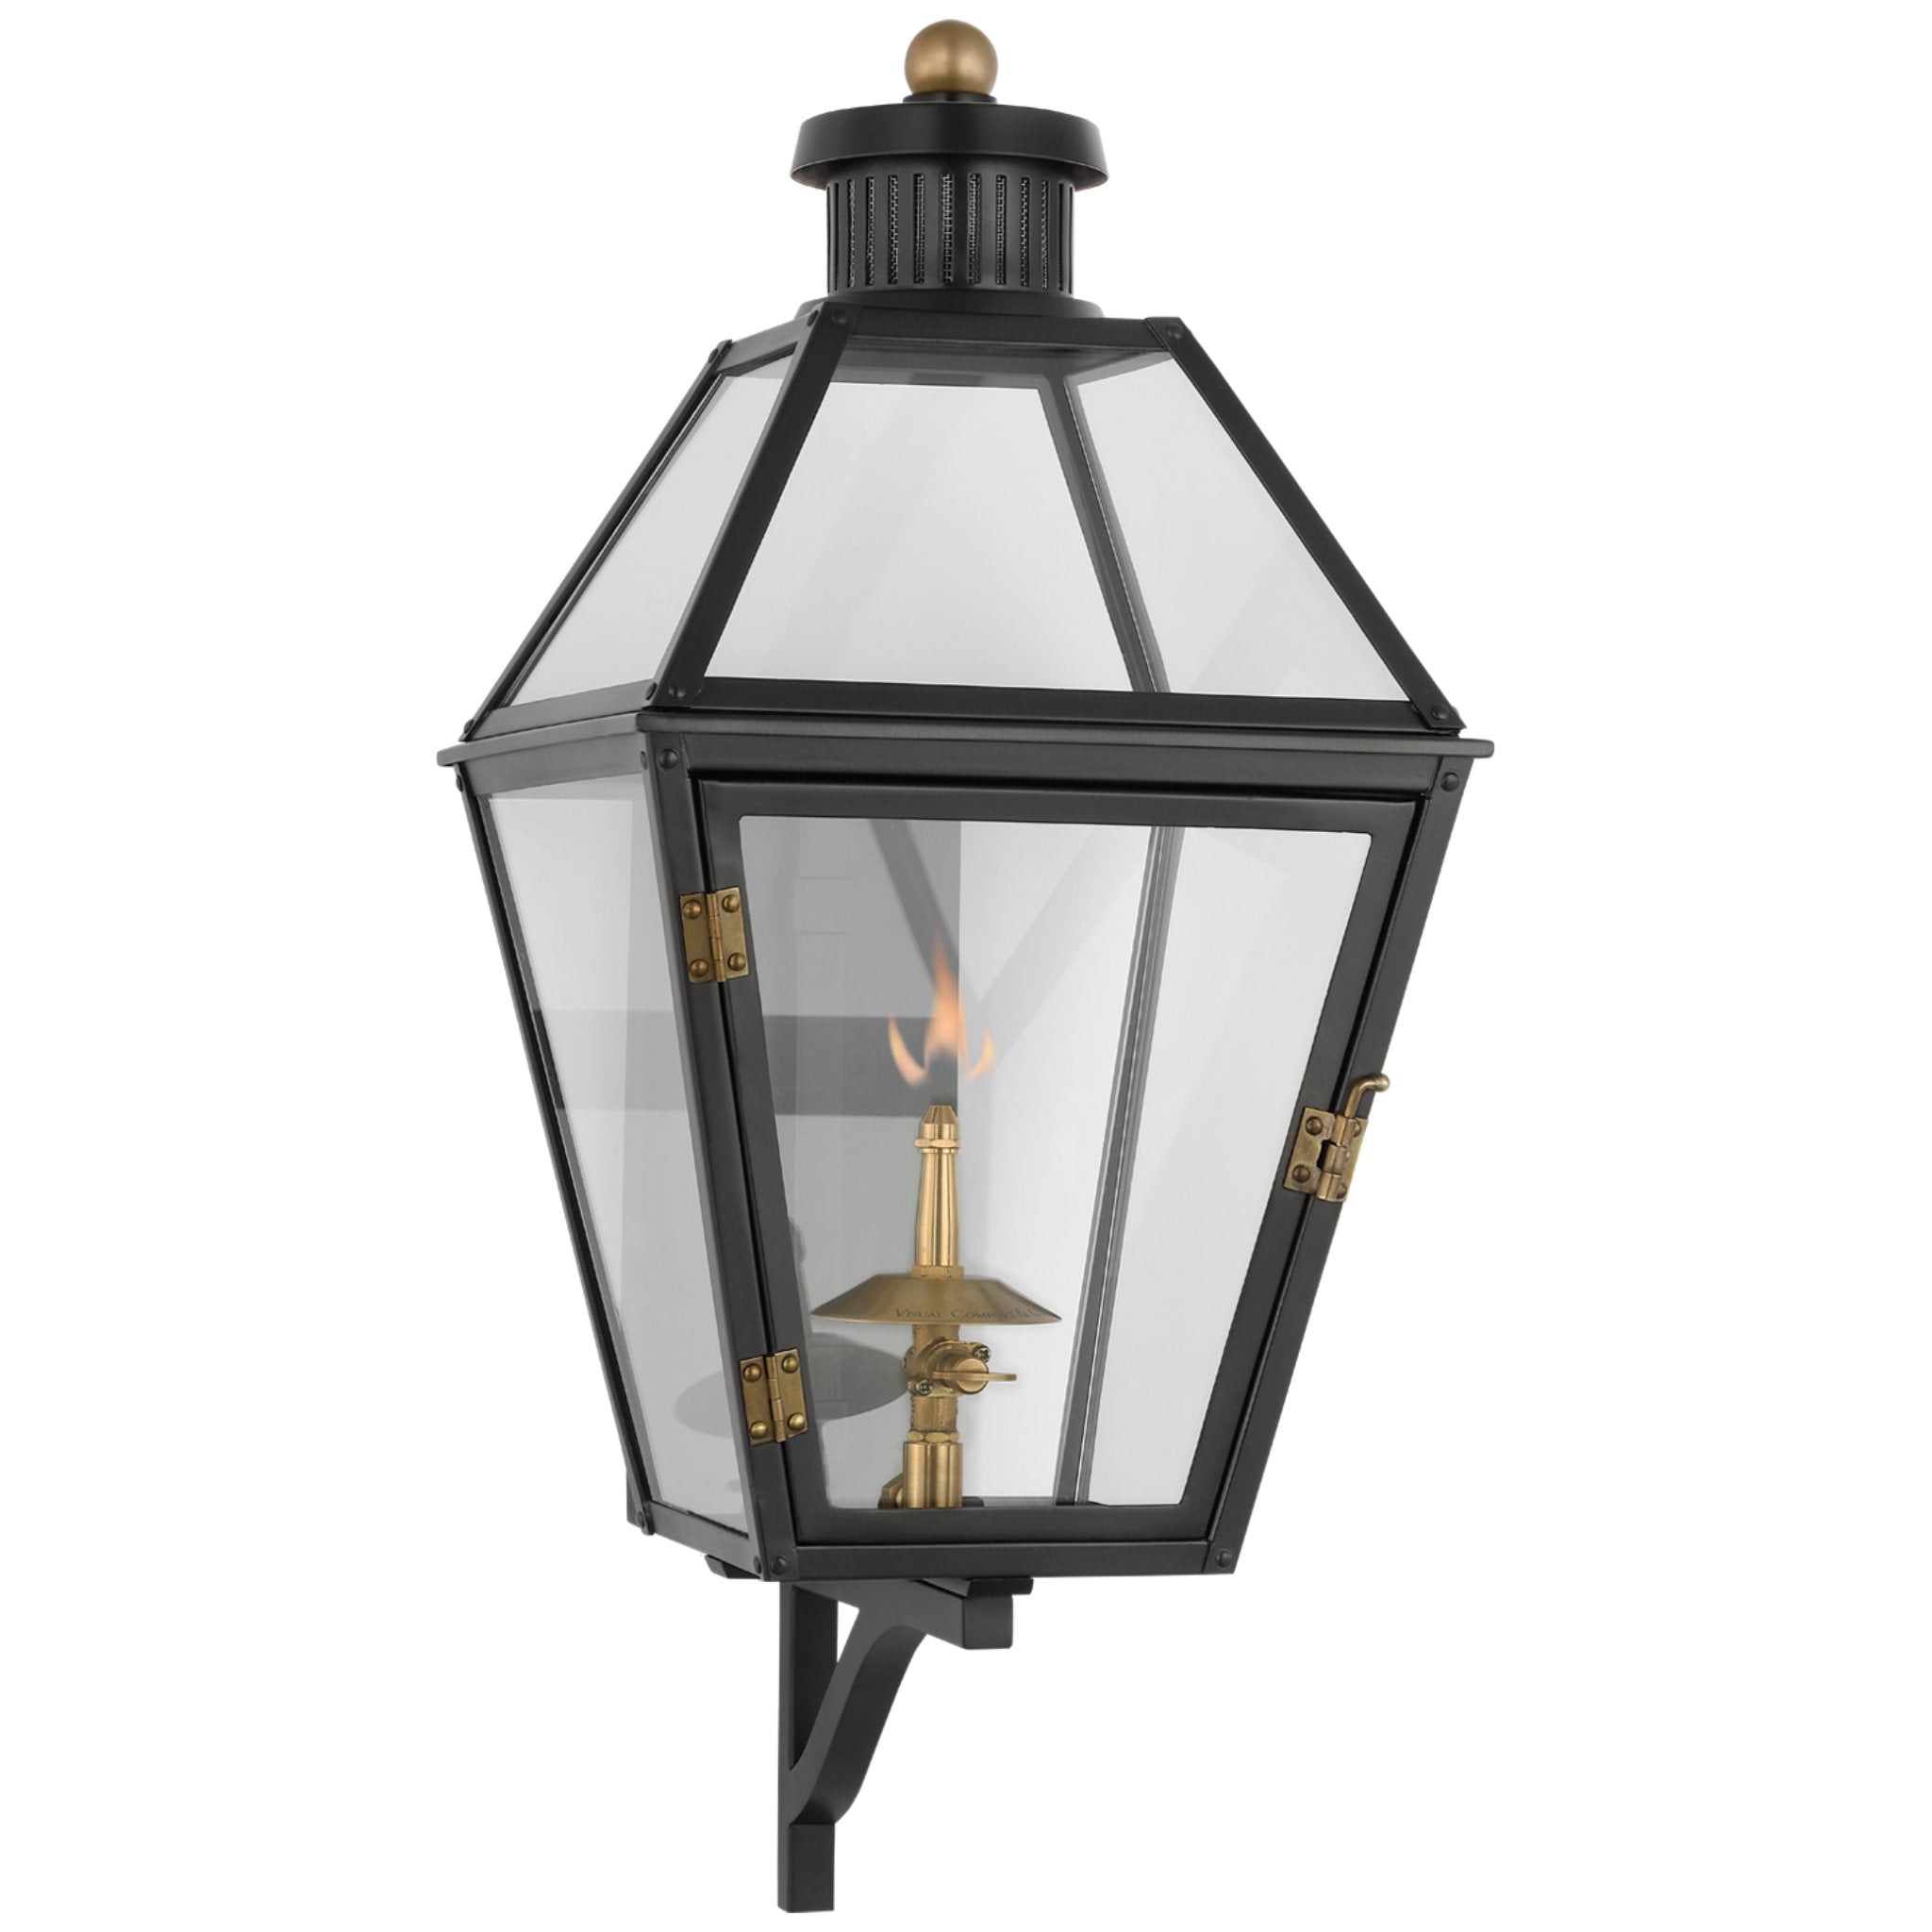 Chapman & Myers Stratford Small Bracketed Gas Wall Lantern in Matte Black with Clear Glass